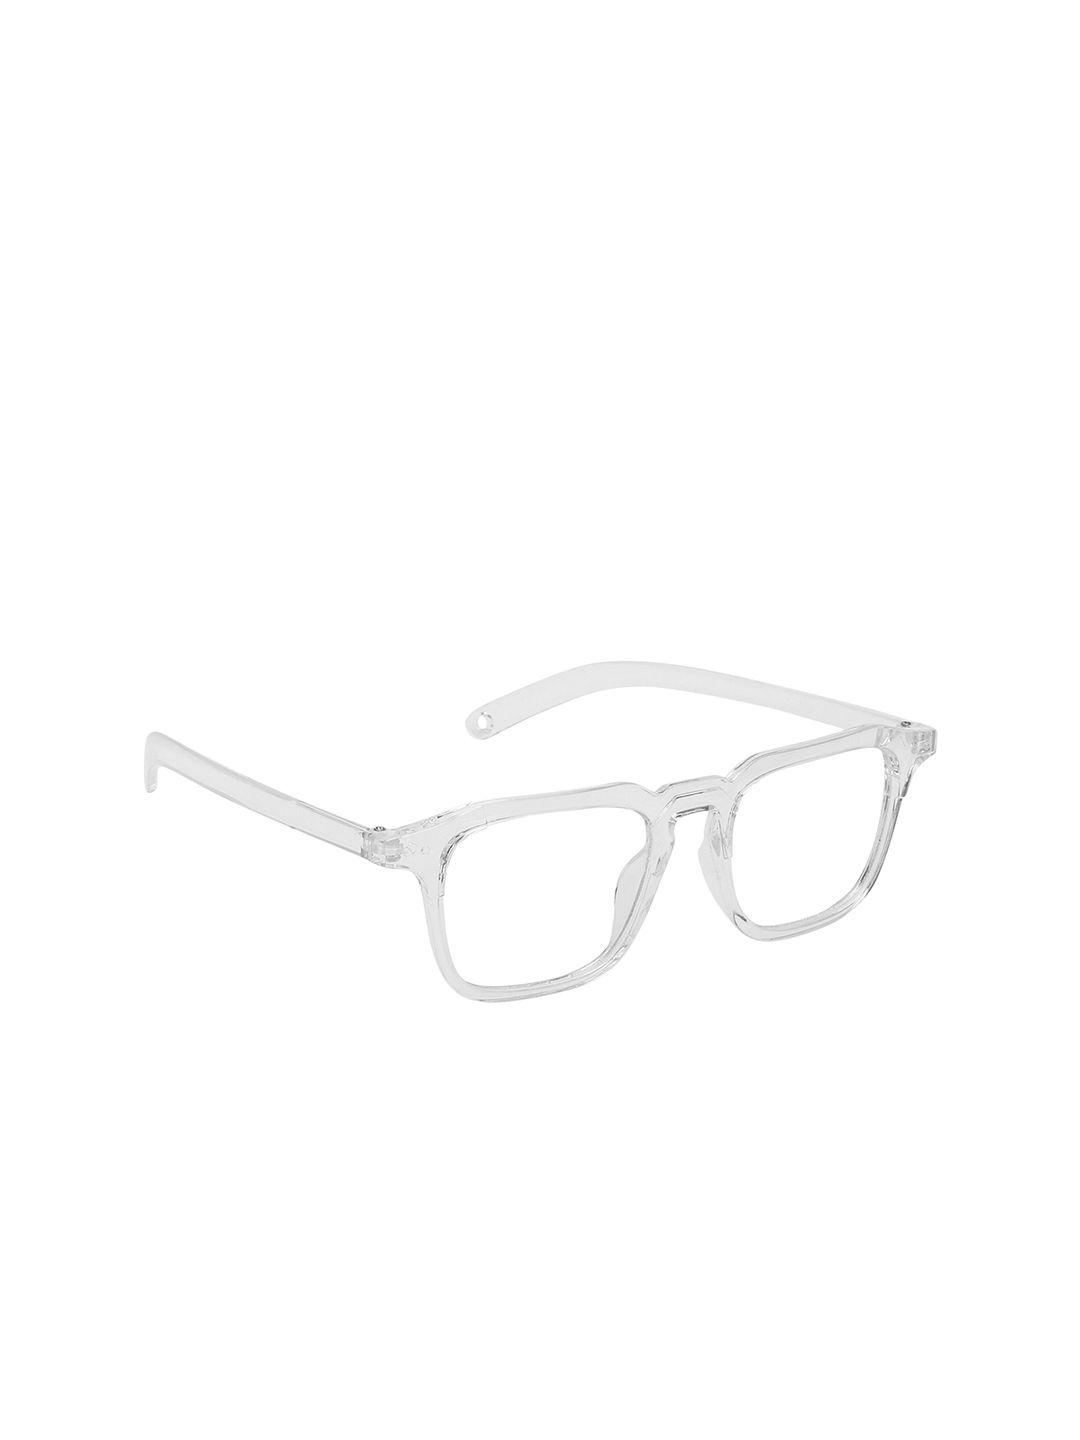 garth square sunglasses with uv protected lens